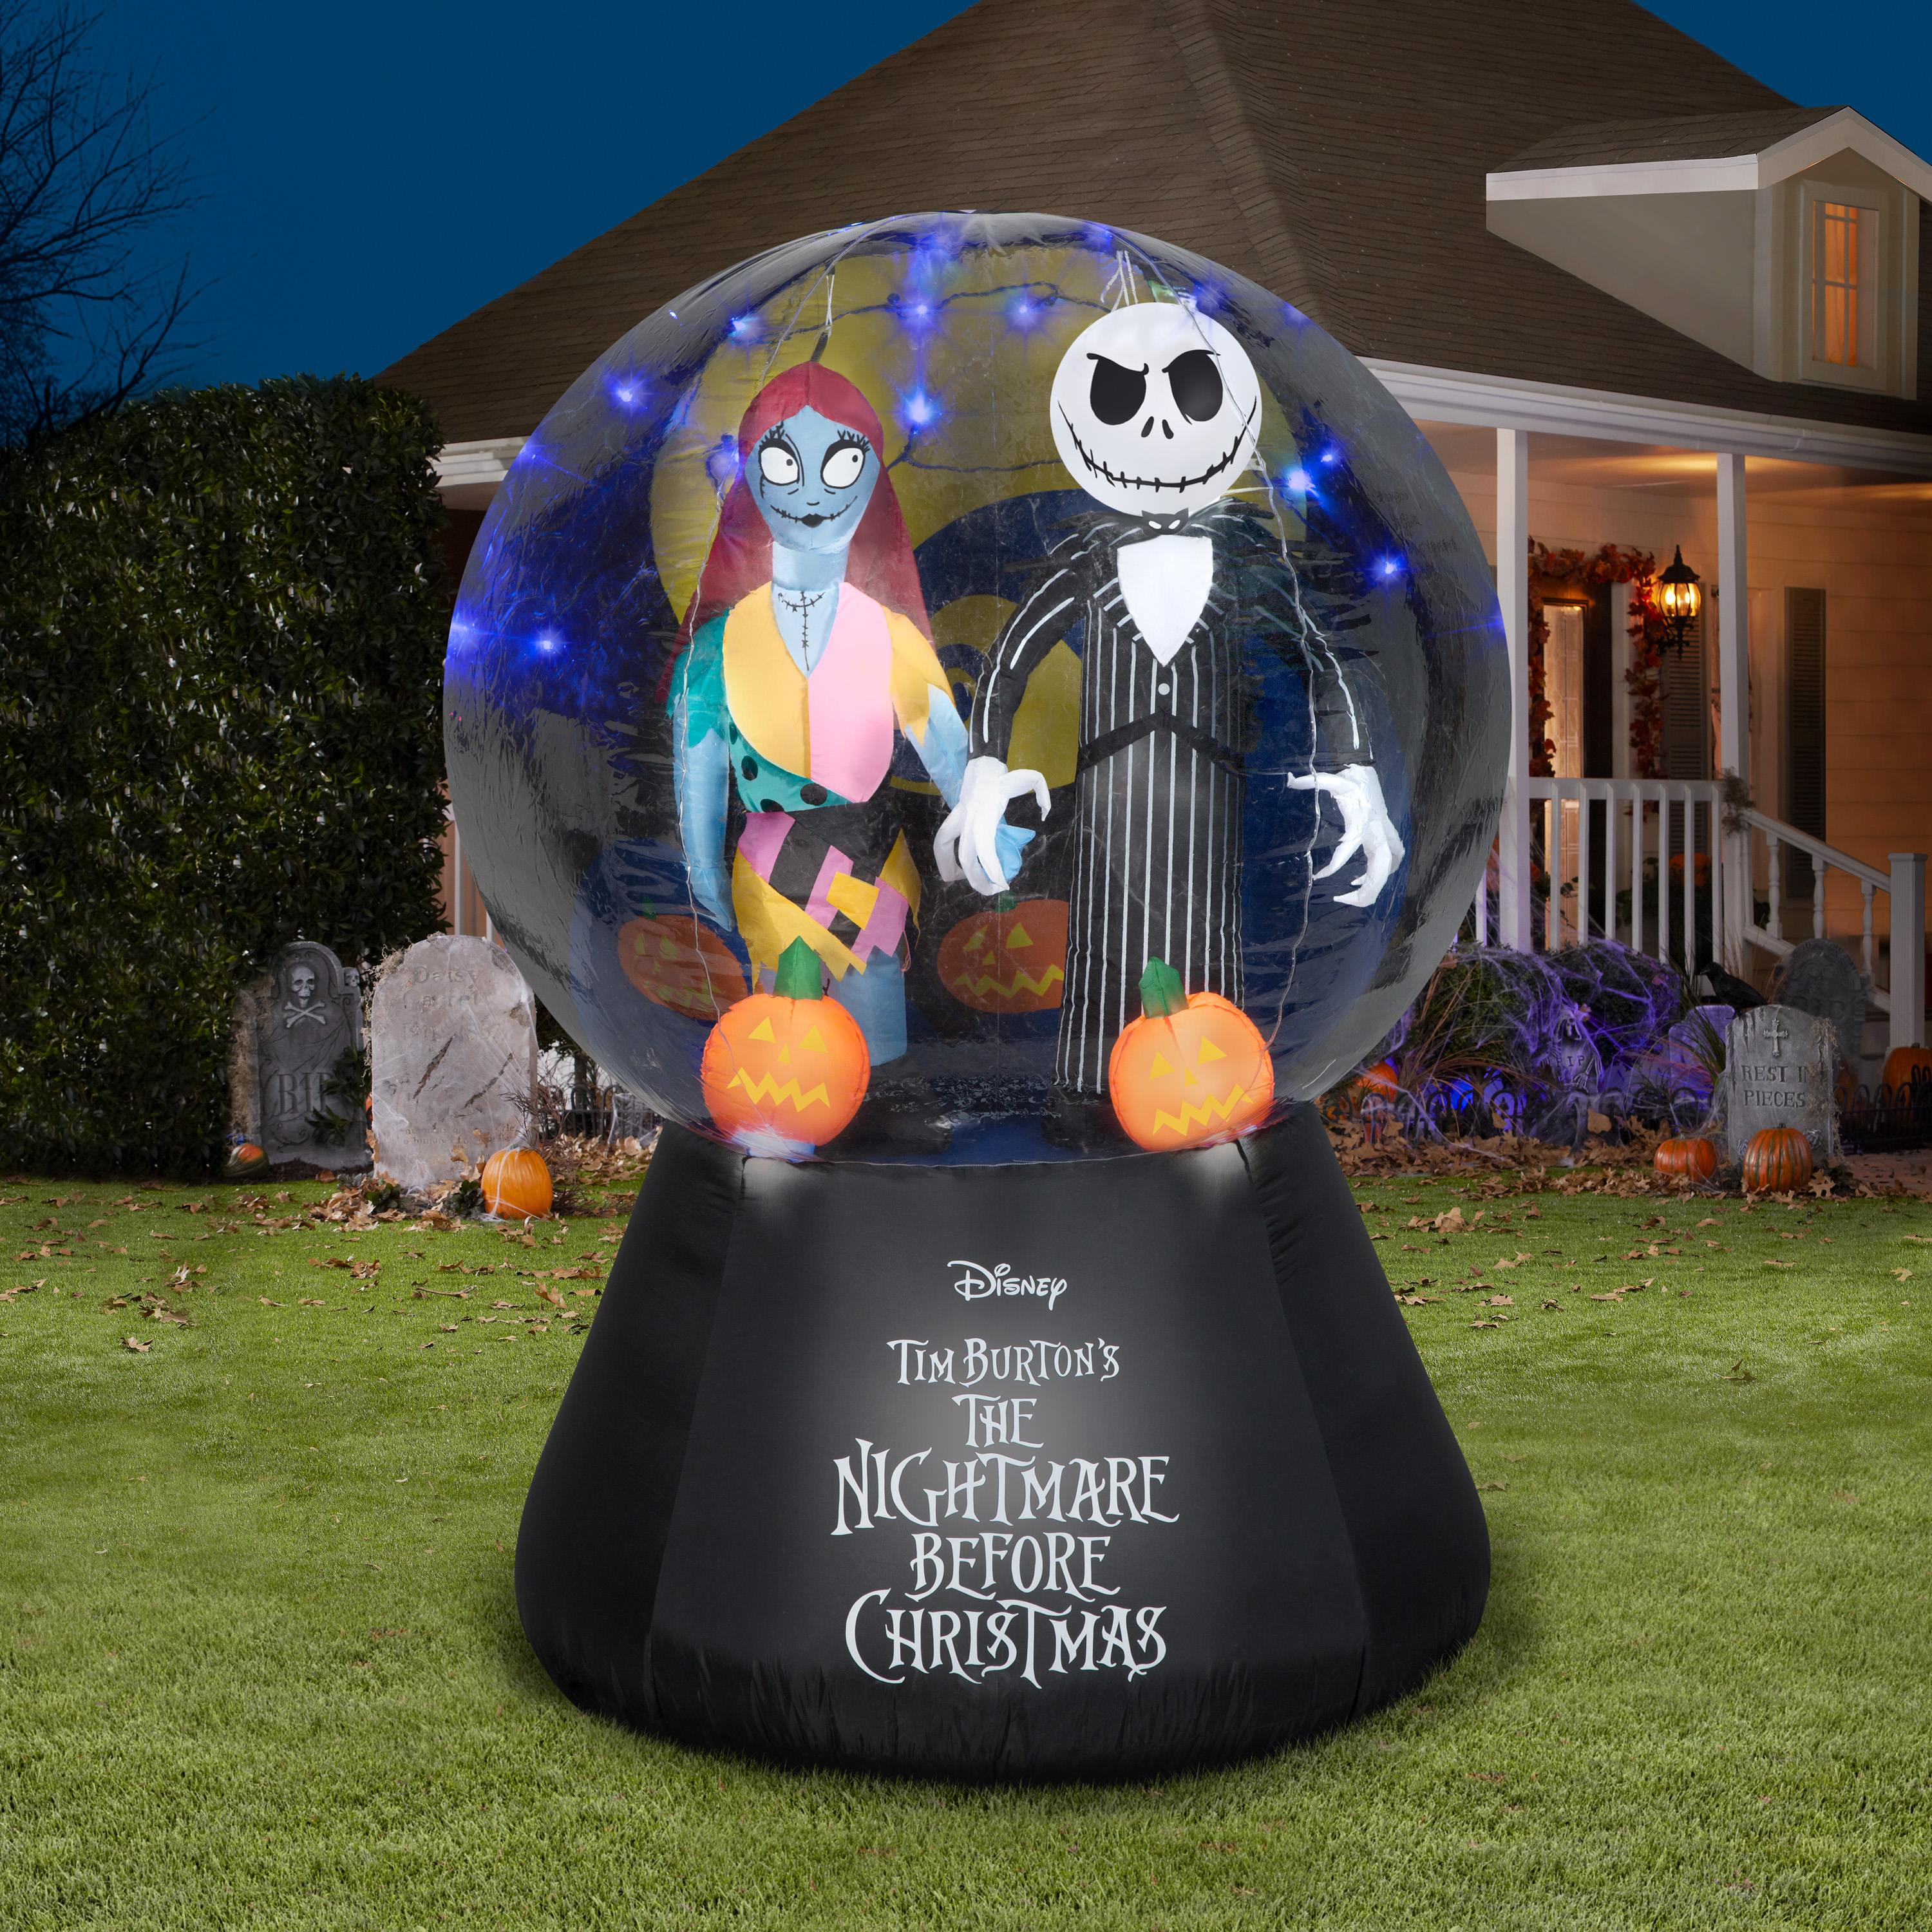 Halloween Airblown Inflatable Nightmare Before Christmas Jack and Sally Globe Scene - image 3 of 5